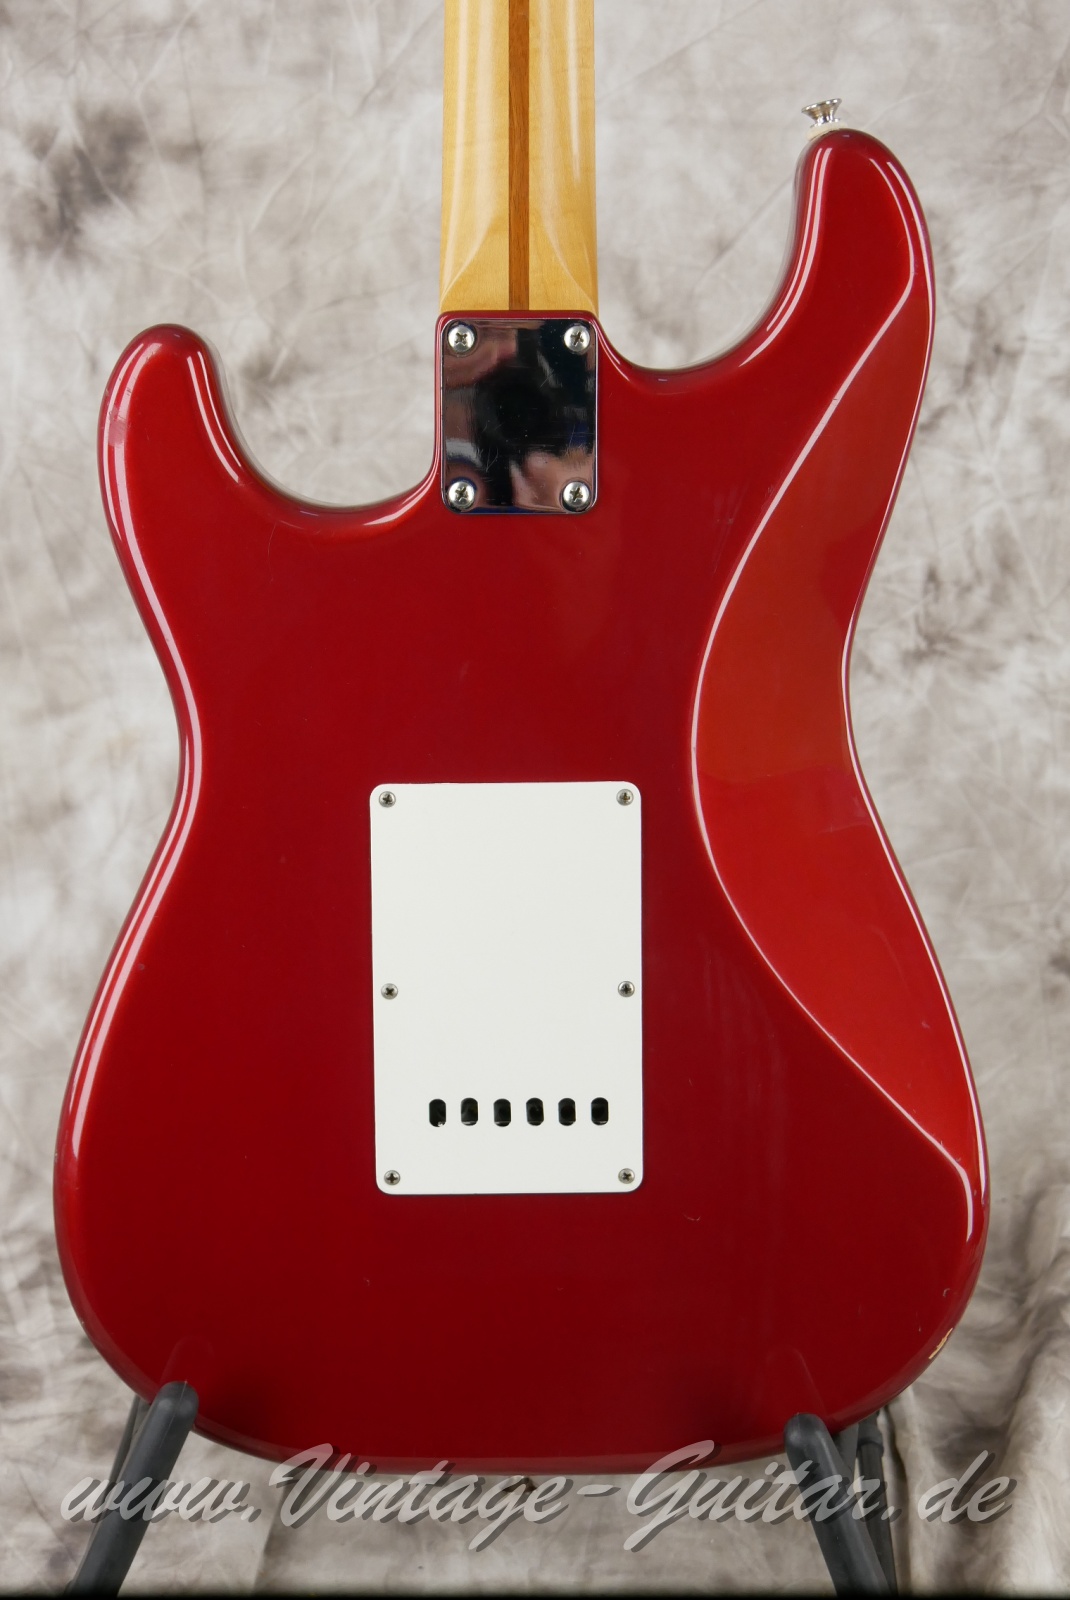 Fender_Stratocaster_Mexico_candy_apple_red_1991-008.JPG